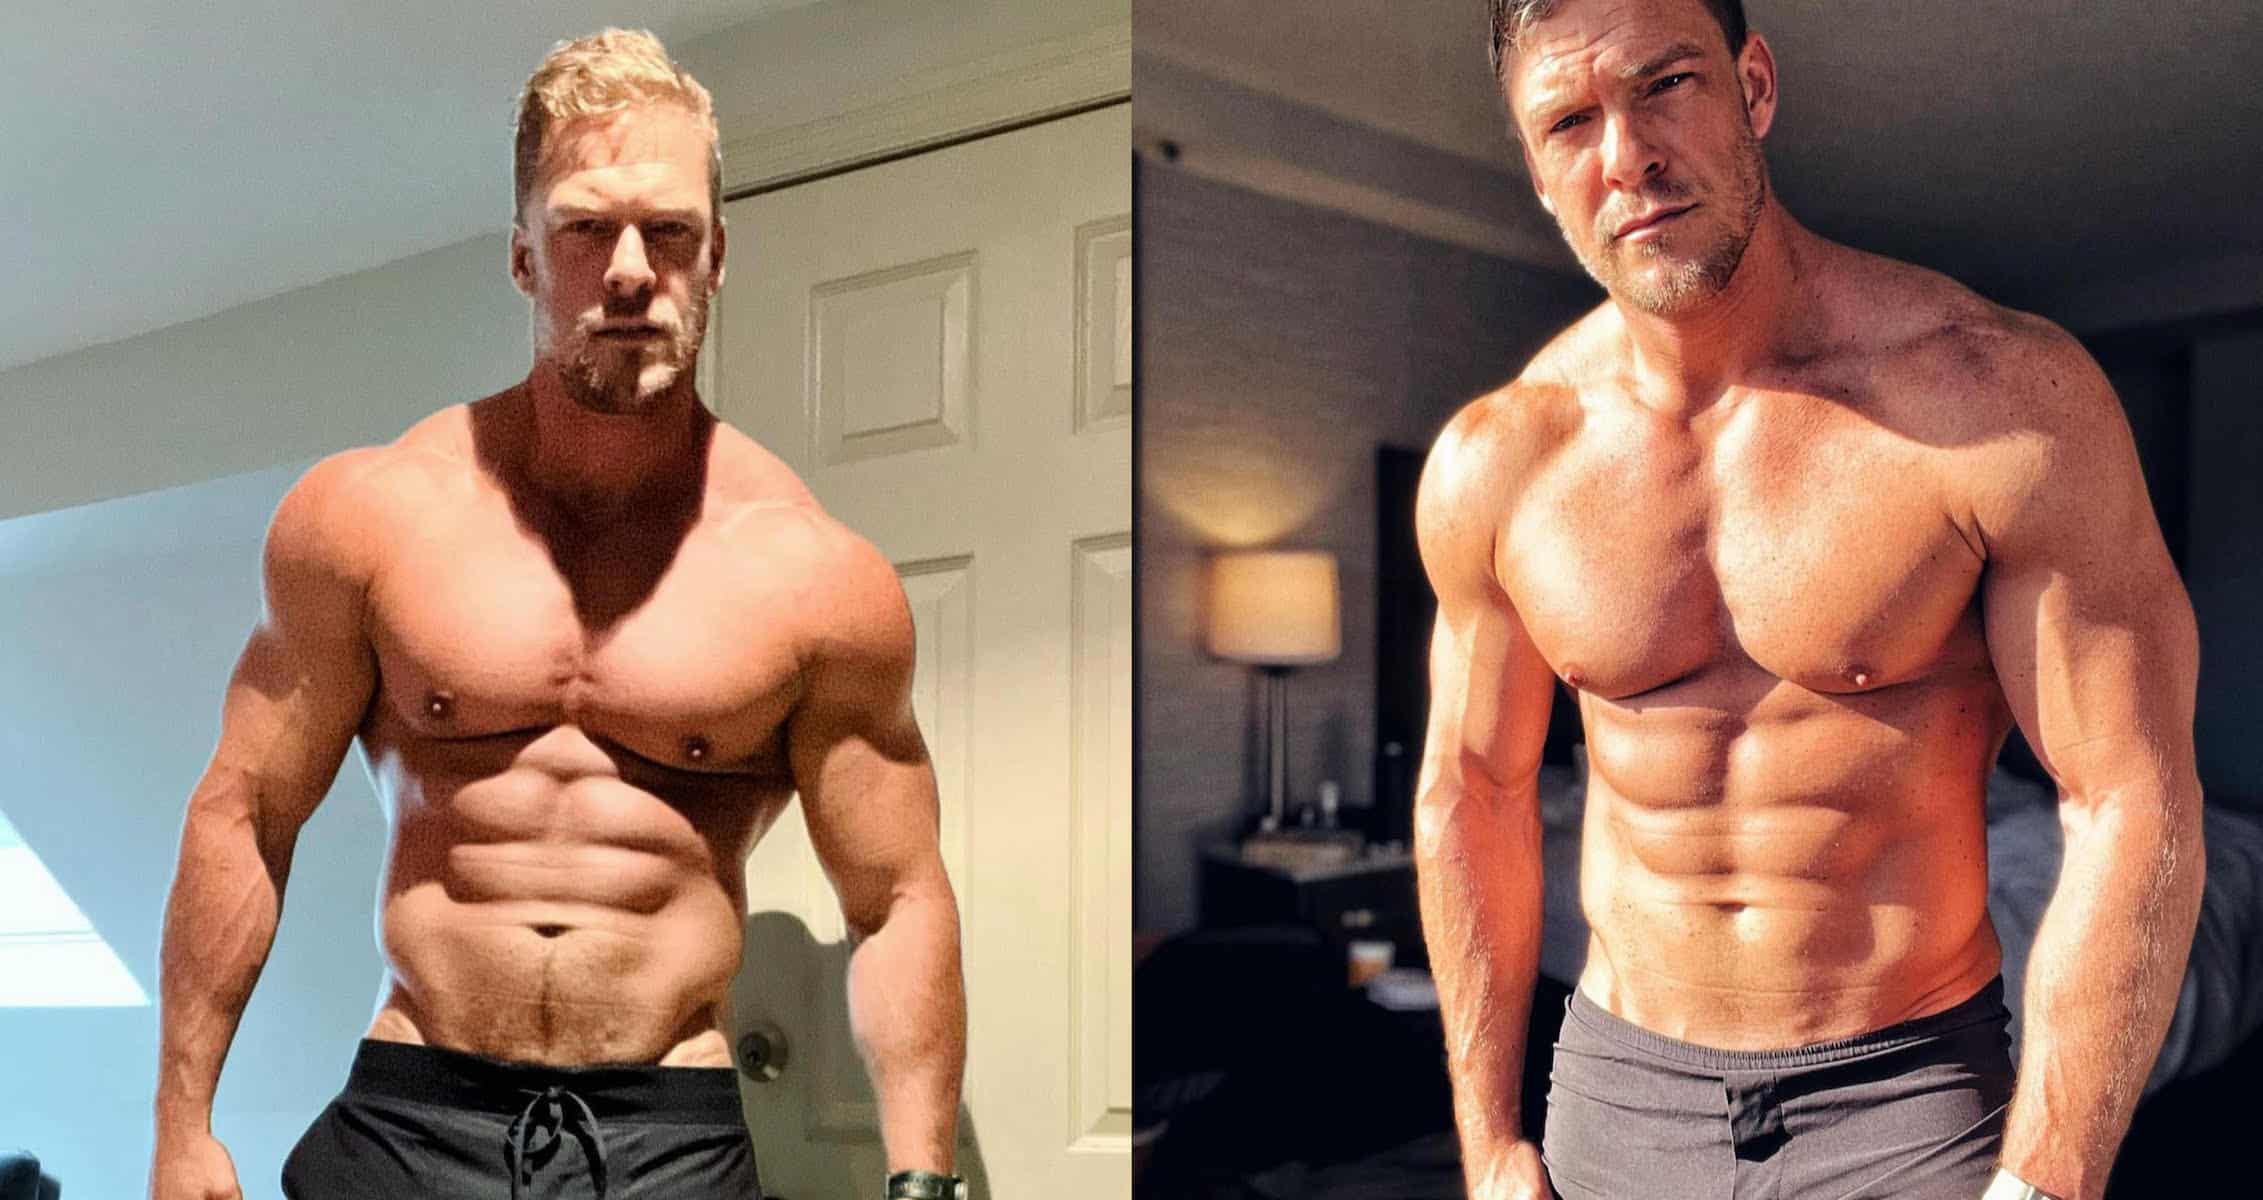 Alan Ritchson explains how he added 30 pounds of muscle for role.